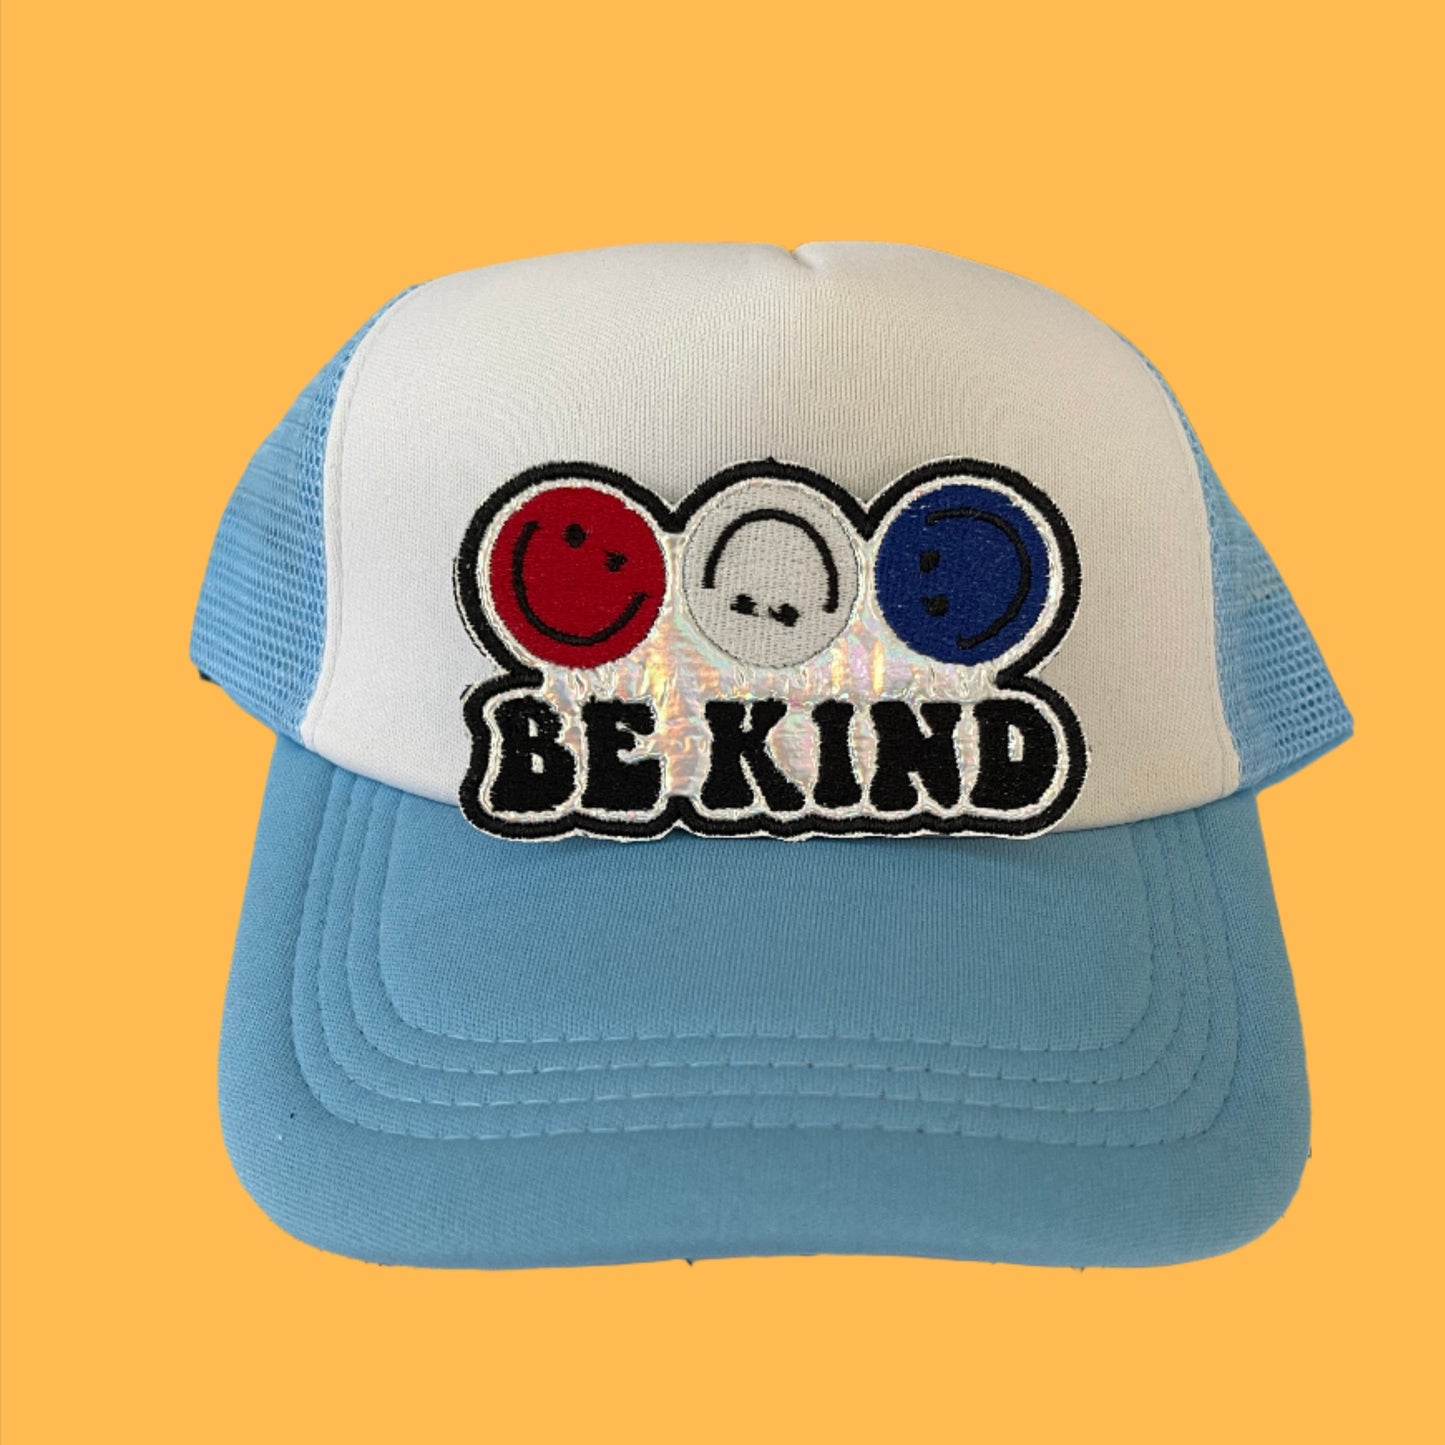 Iron-on patch featuring three smiley faces in red, white, and blue with the phrase "BE KIND" on a holographic silver background.